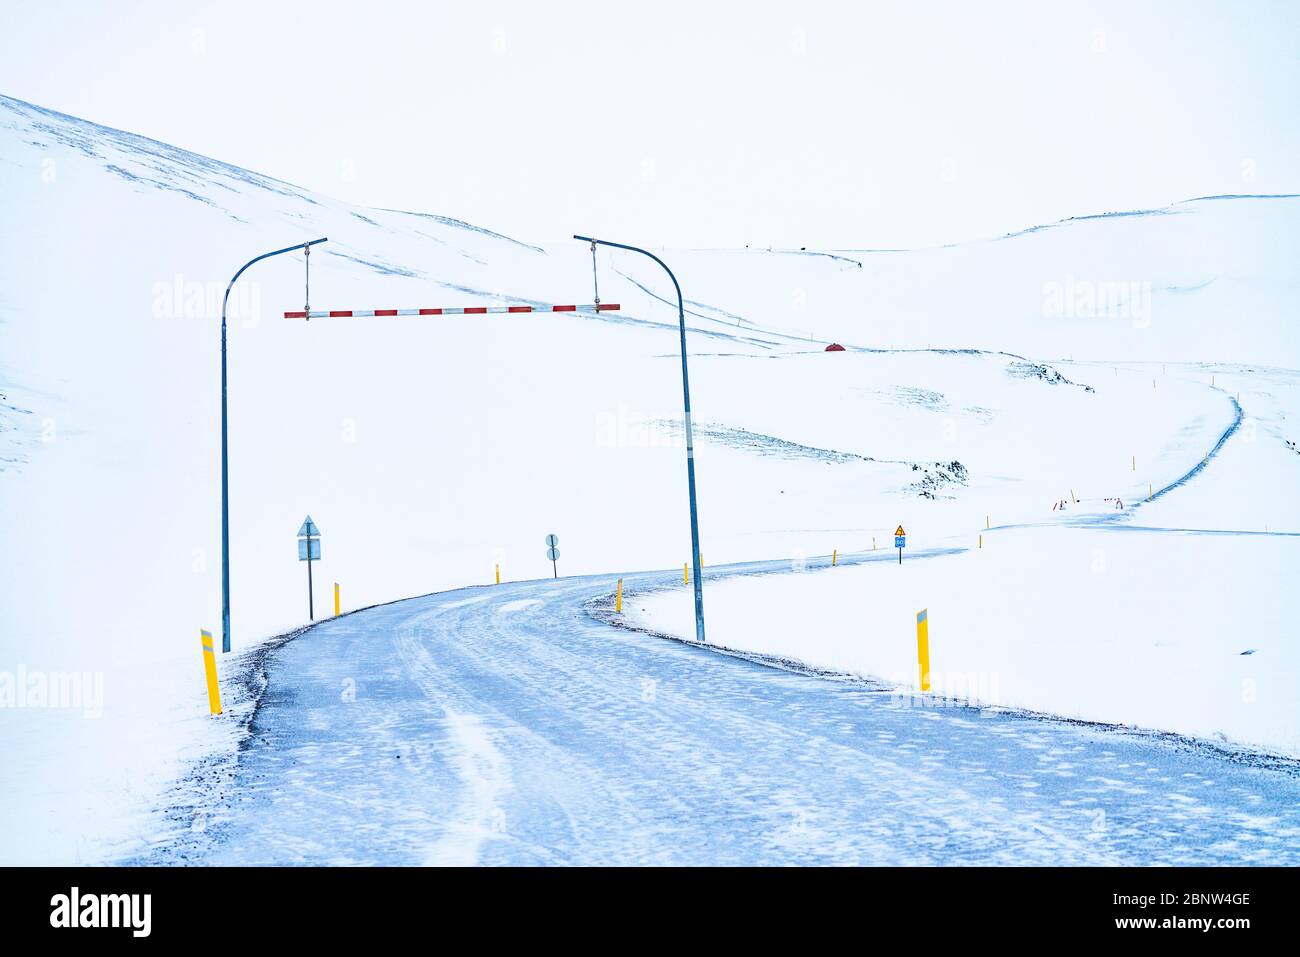 Snow covered Icelandic road snaking up to a mountain pass trough a snow covered landscape Stock Photo